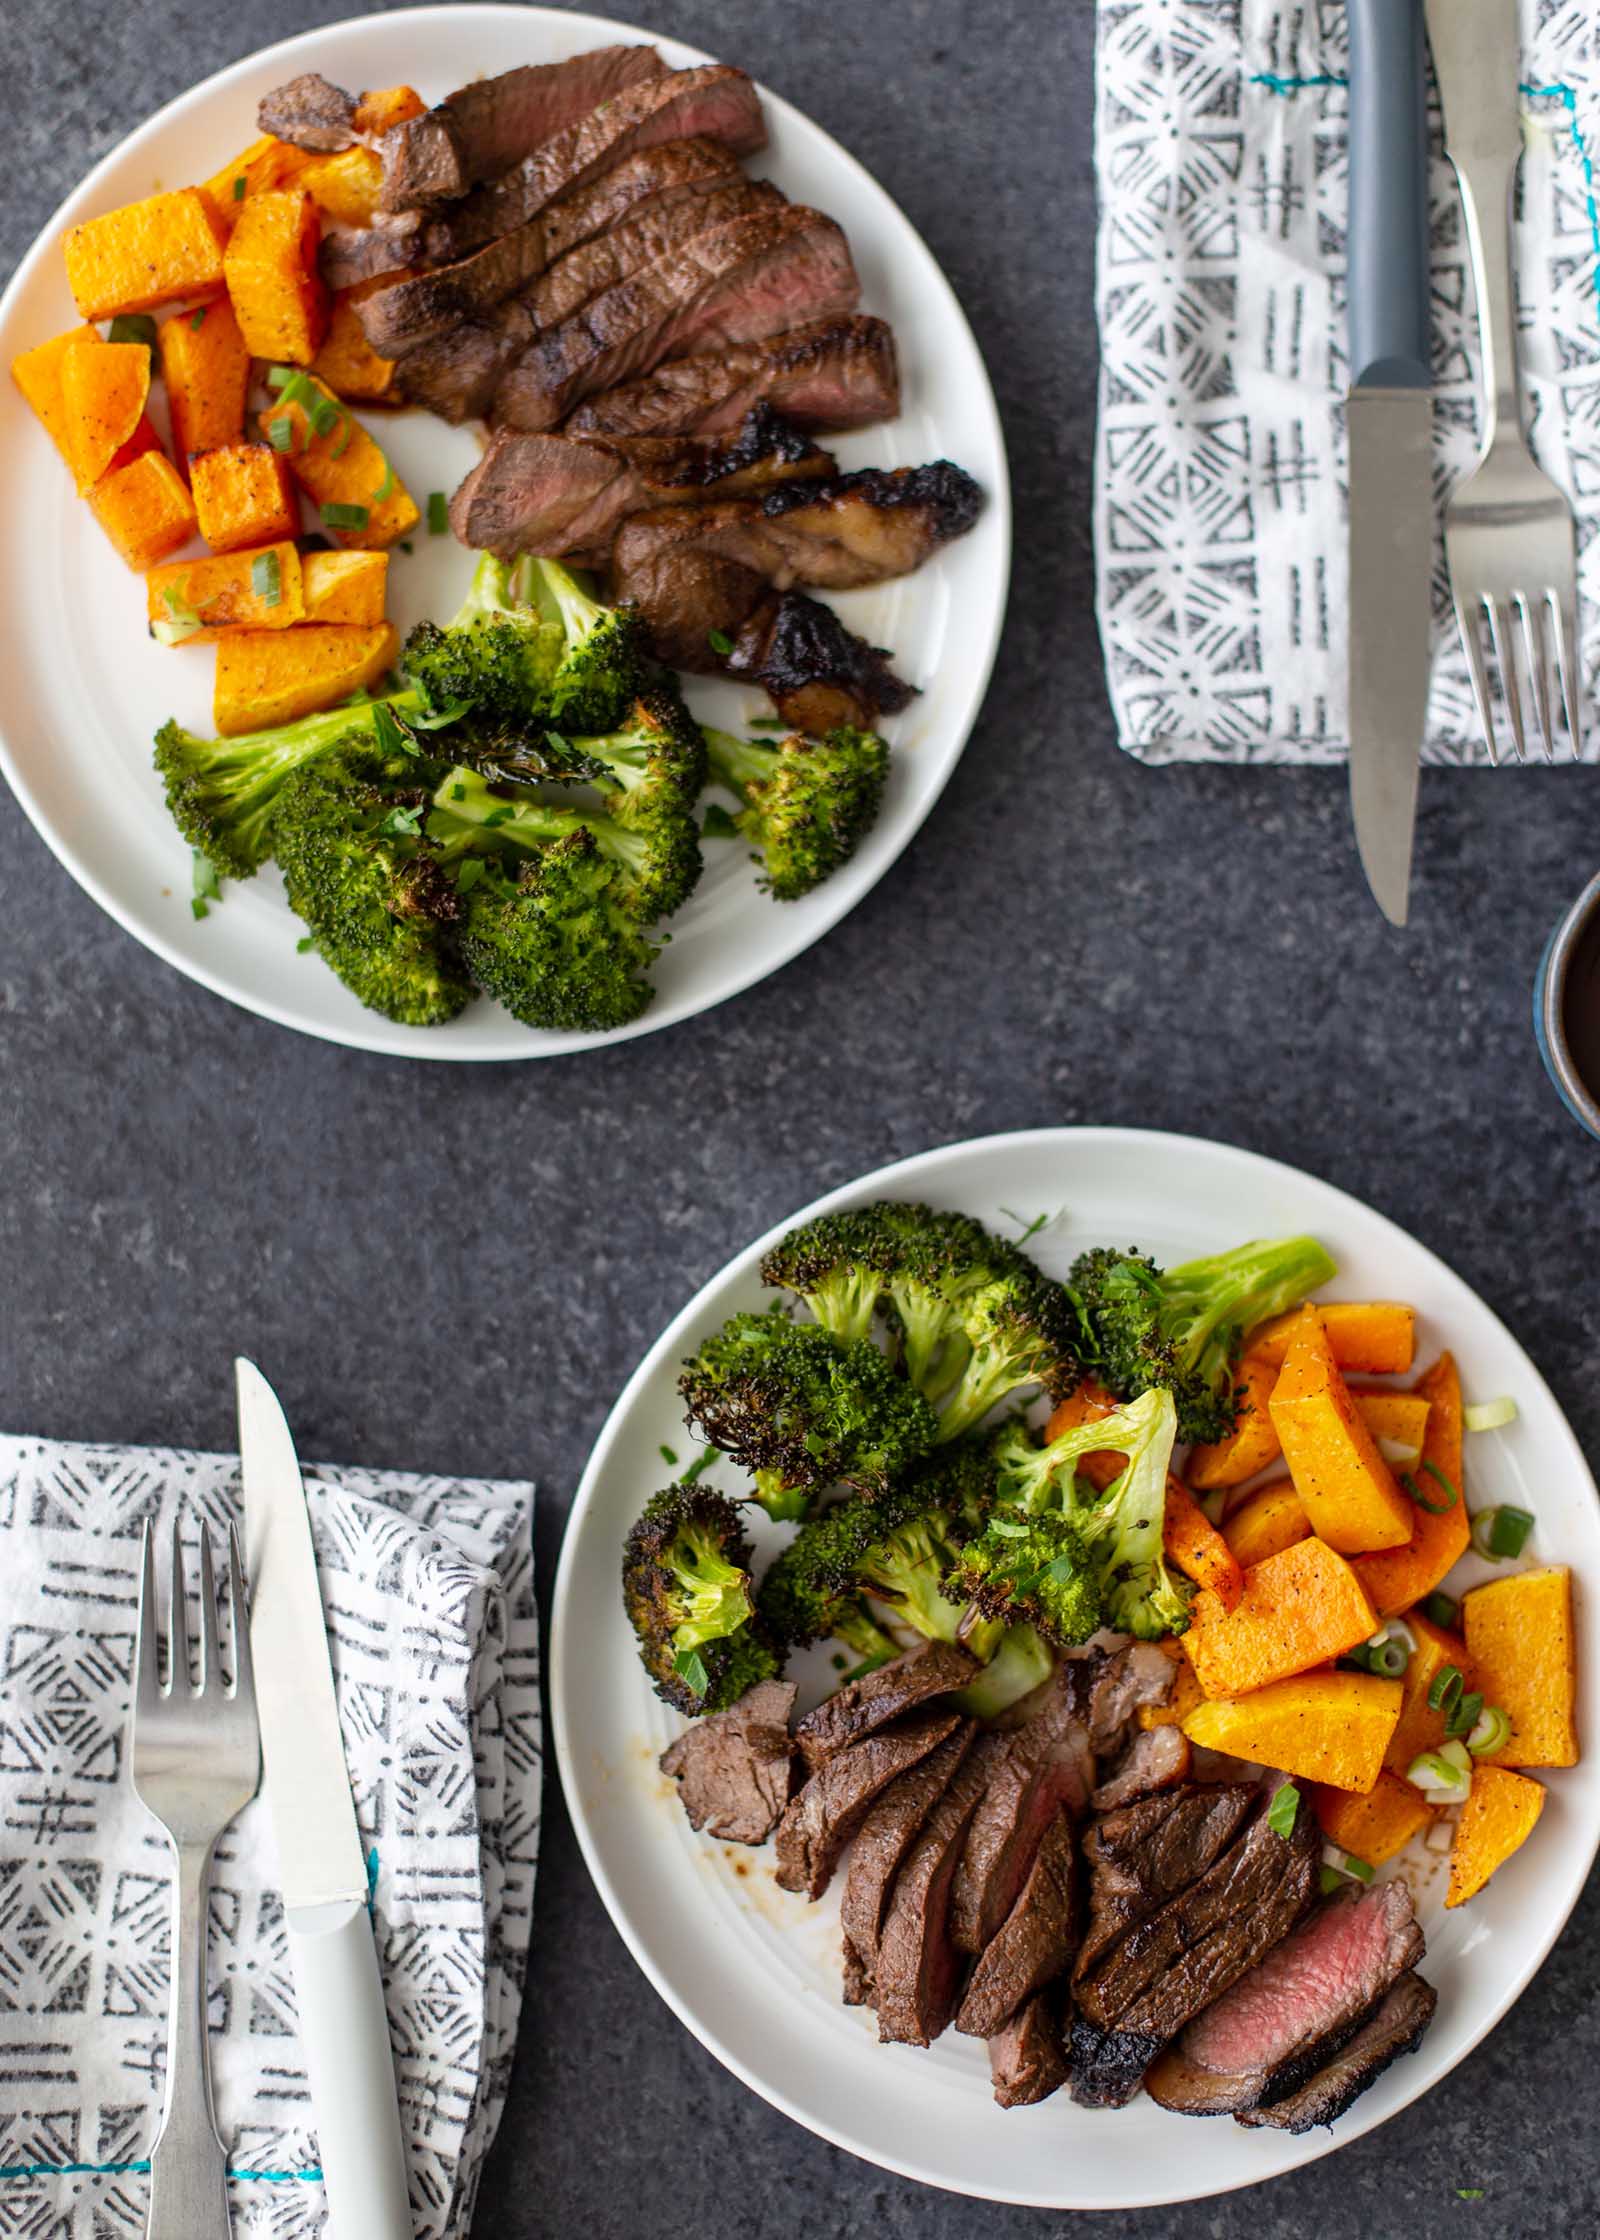 Two plates with sliced easy broiled steak, chopped broccoli and squash. Silverware and a linen are next to each plate.